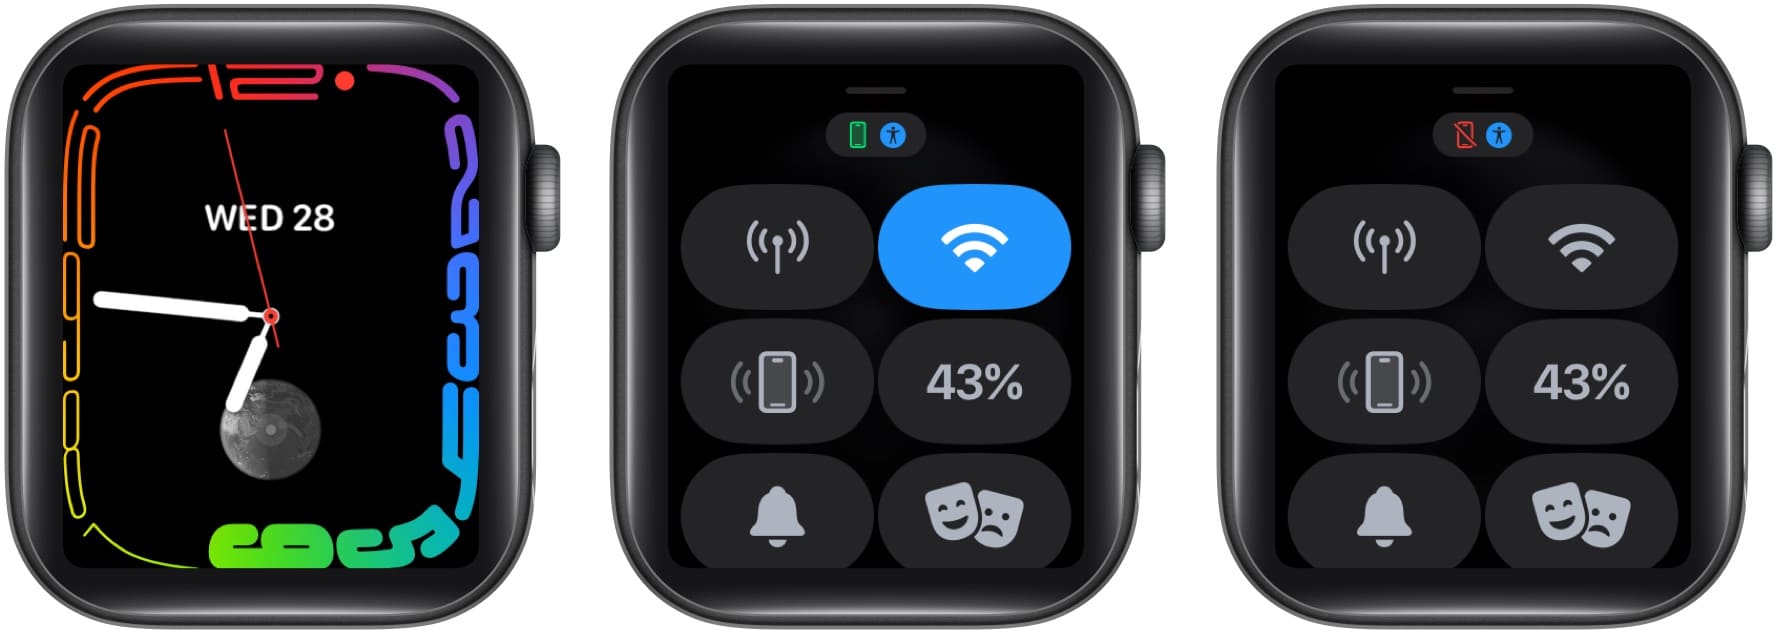 Checking iPhone connection status on Apple Watch